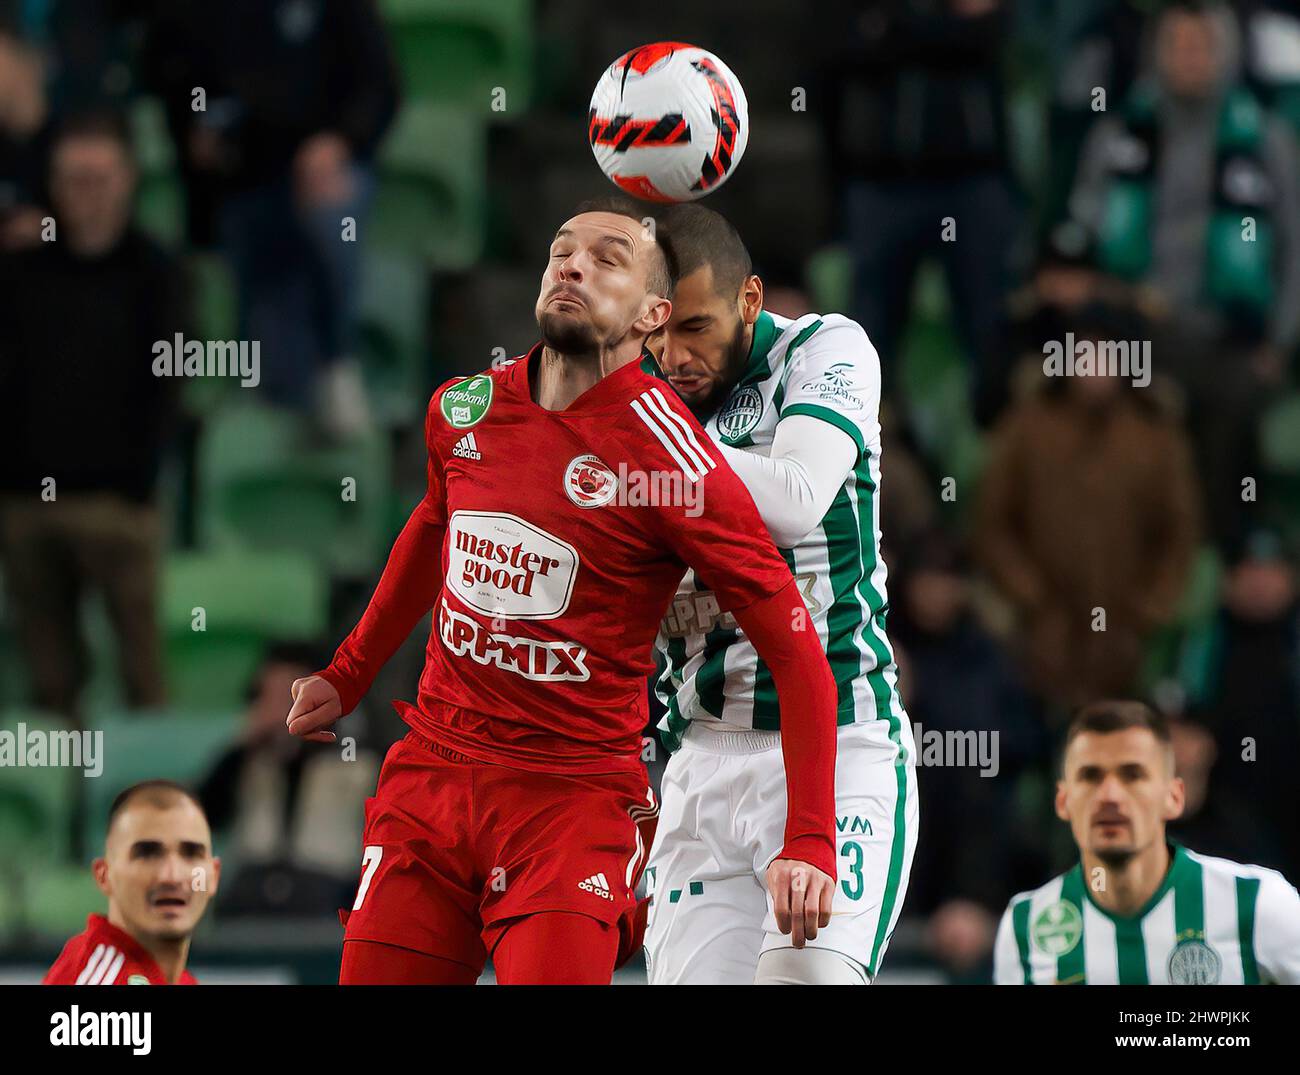 BUDAPEST, HUNGARY - MARCH 6: Jasmin Mesanovic of Kisvarda Master Good battles for the ball in the air with Aissa Laidouni of Ferencvarosi TC during the Hungarian OTP Bank Liga match between Ferencvarosi TC and Kisvarda Master Good at Groupama Arena on March 6, 2022 in Budapest, Hungary. Stock Photo